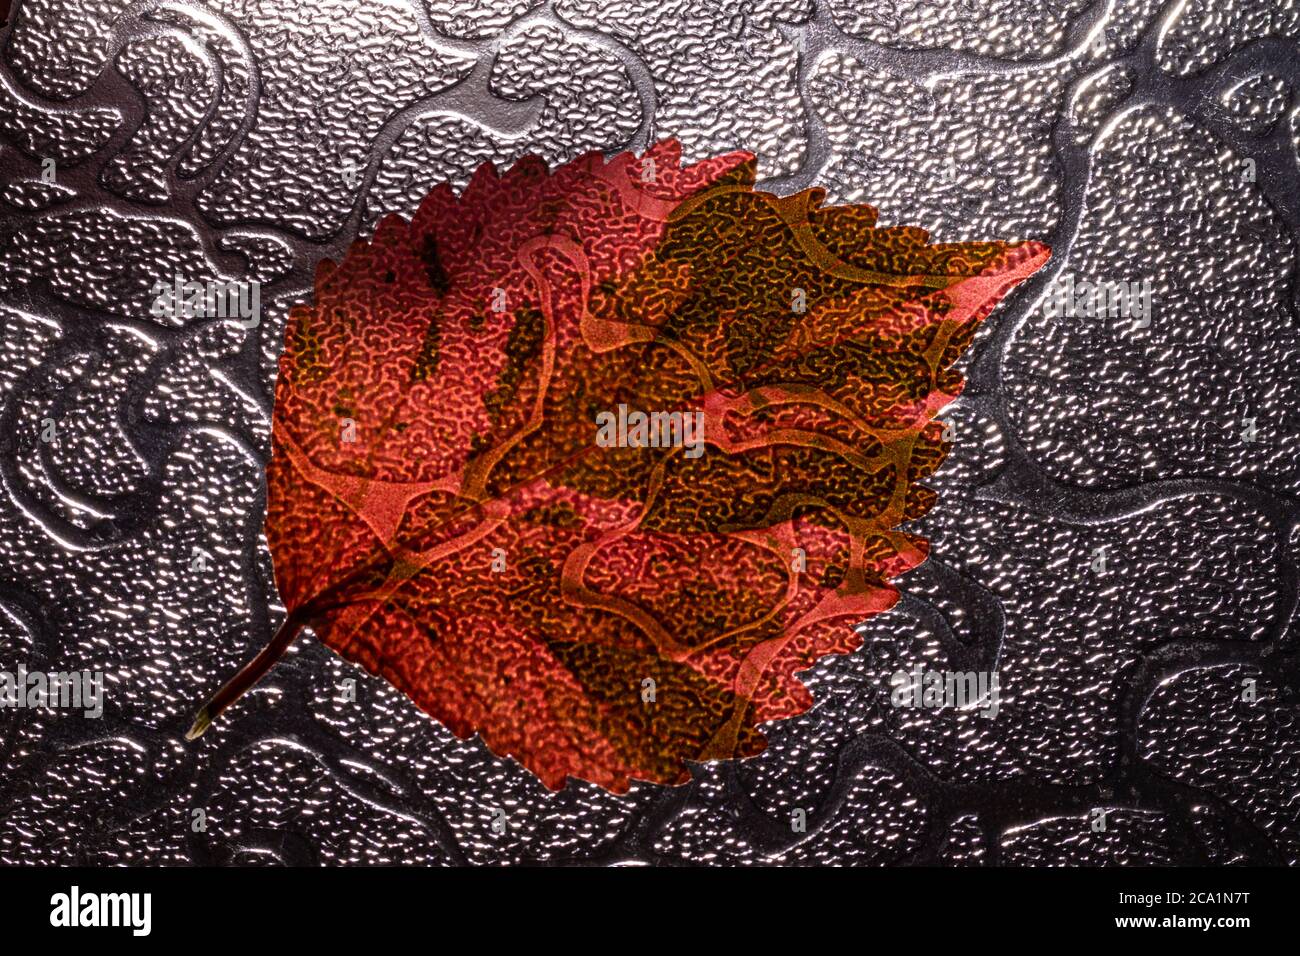 Still life and details of red leaves of a tree. Acalypha wilkesiana, Fire Dragon Acalypha, Hoja de Cobre, Copper Leaf. Stock Photo